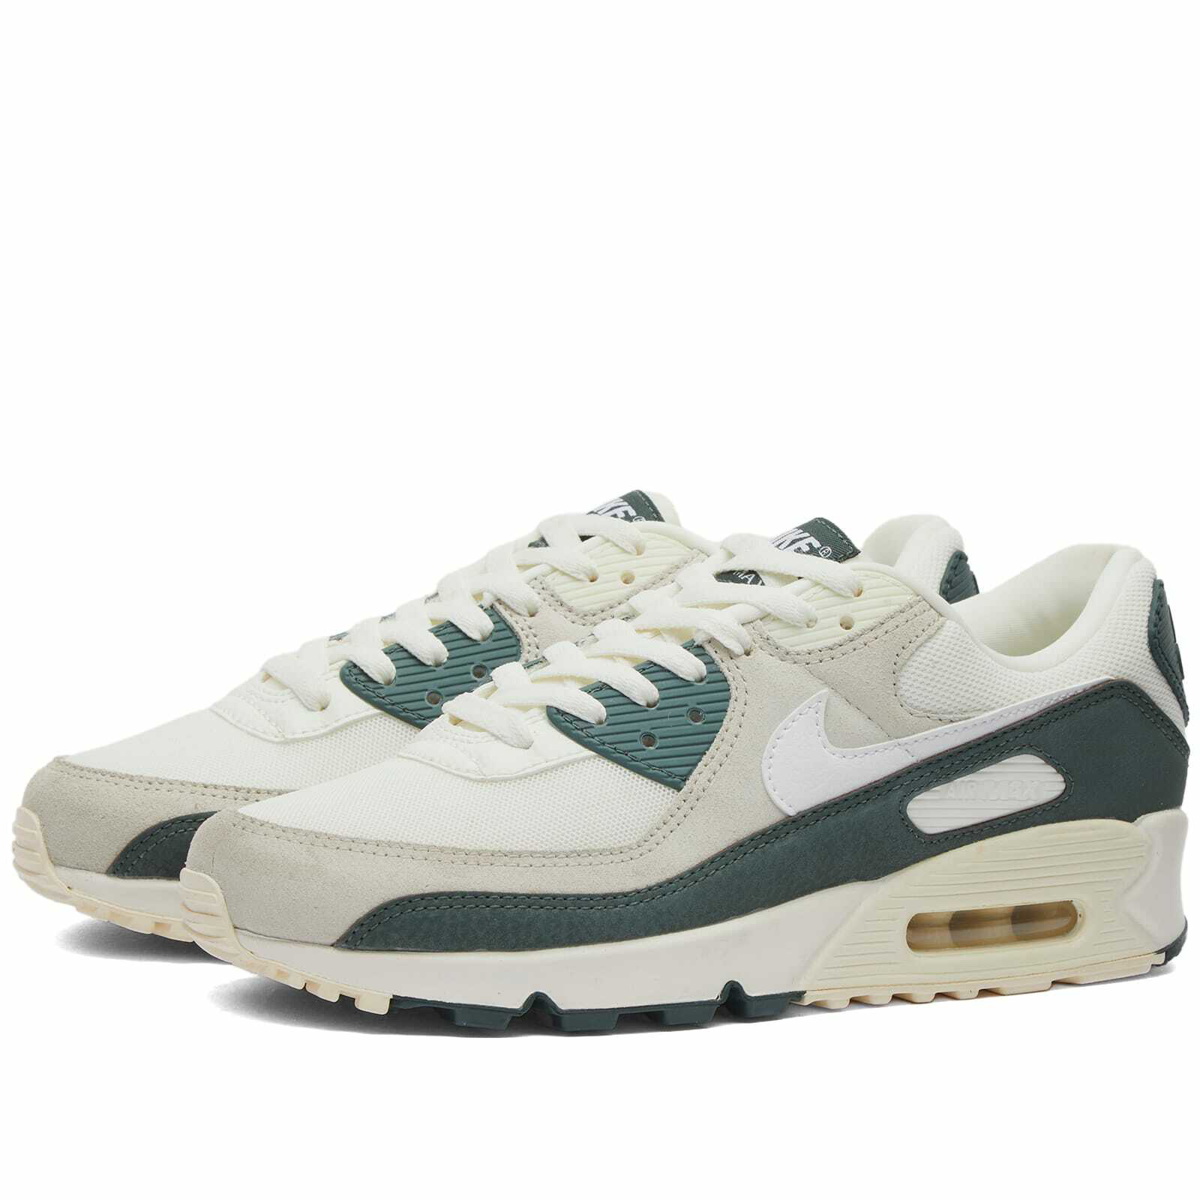 Photo: Nike Women's W Air Max 90 Sneakers in Sail/White/Vintage Green